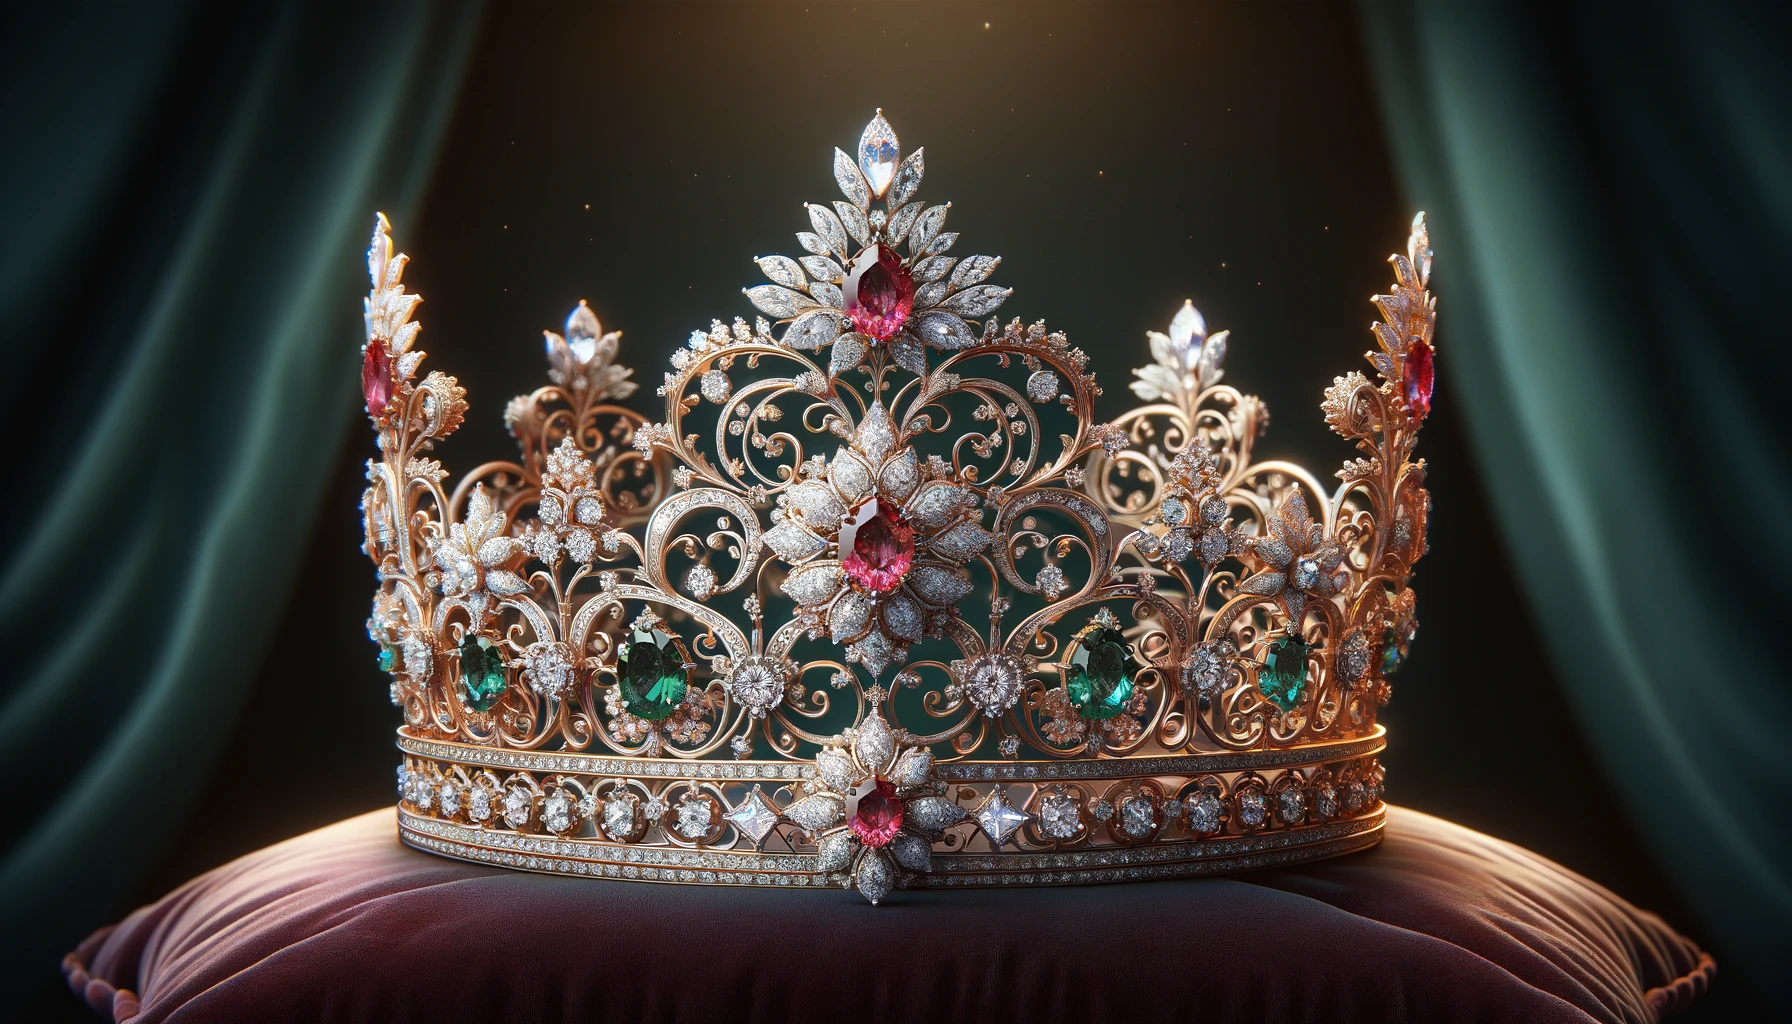 A luxurious and opulent tiara adorned with an abundance of precious gems including diamonds, rubies, and sapphires, set in intricately crafted gold or platinum, featuring filigree patterns and floral motifs, presented on a regal background.